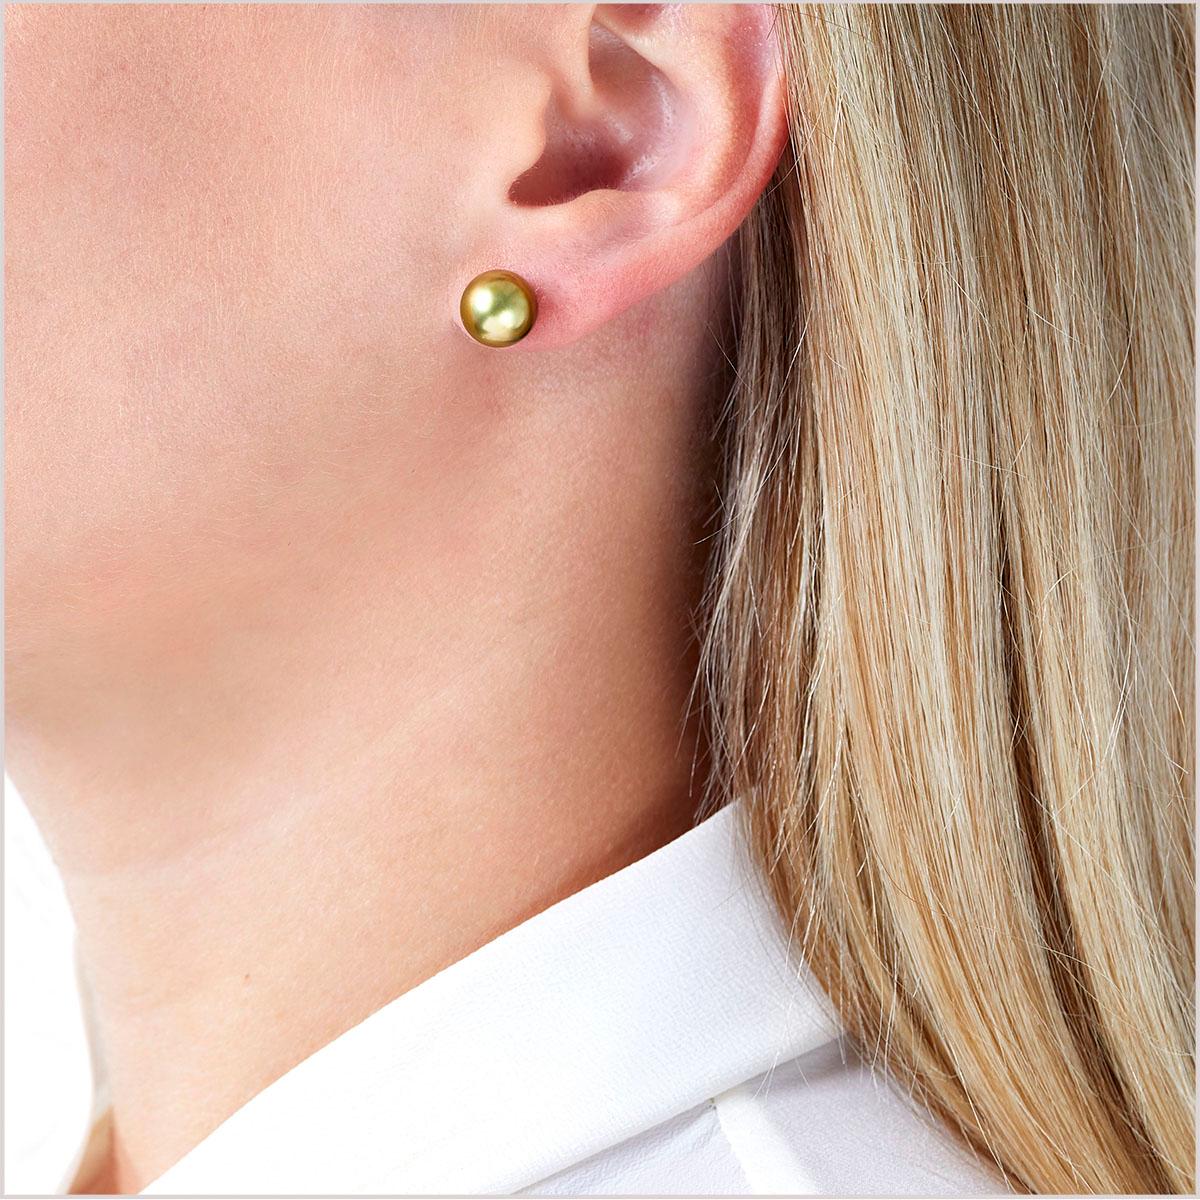 These unique pistachio-coloured Tahitian pearl stud from Yoko London offer an exceptional twist on a classic style. The simple 18 Karat White Gold setting allows the extraordinary colour of the pearl to speak for itself. To achieve the spectacular